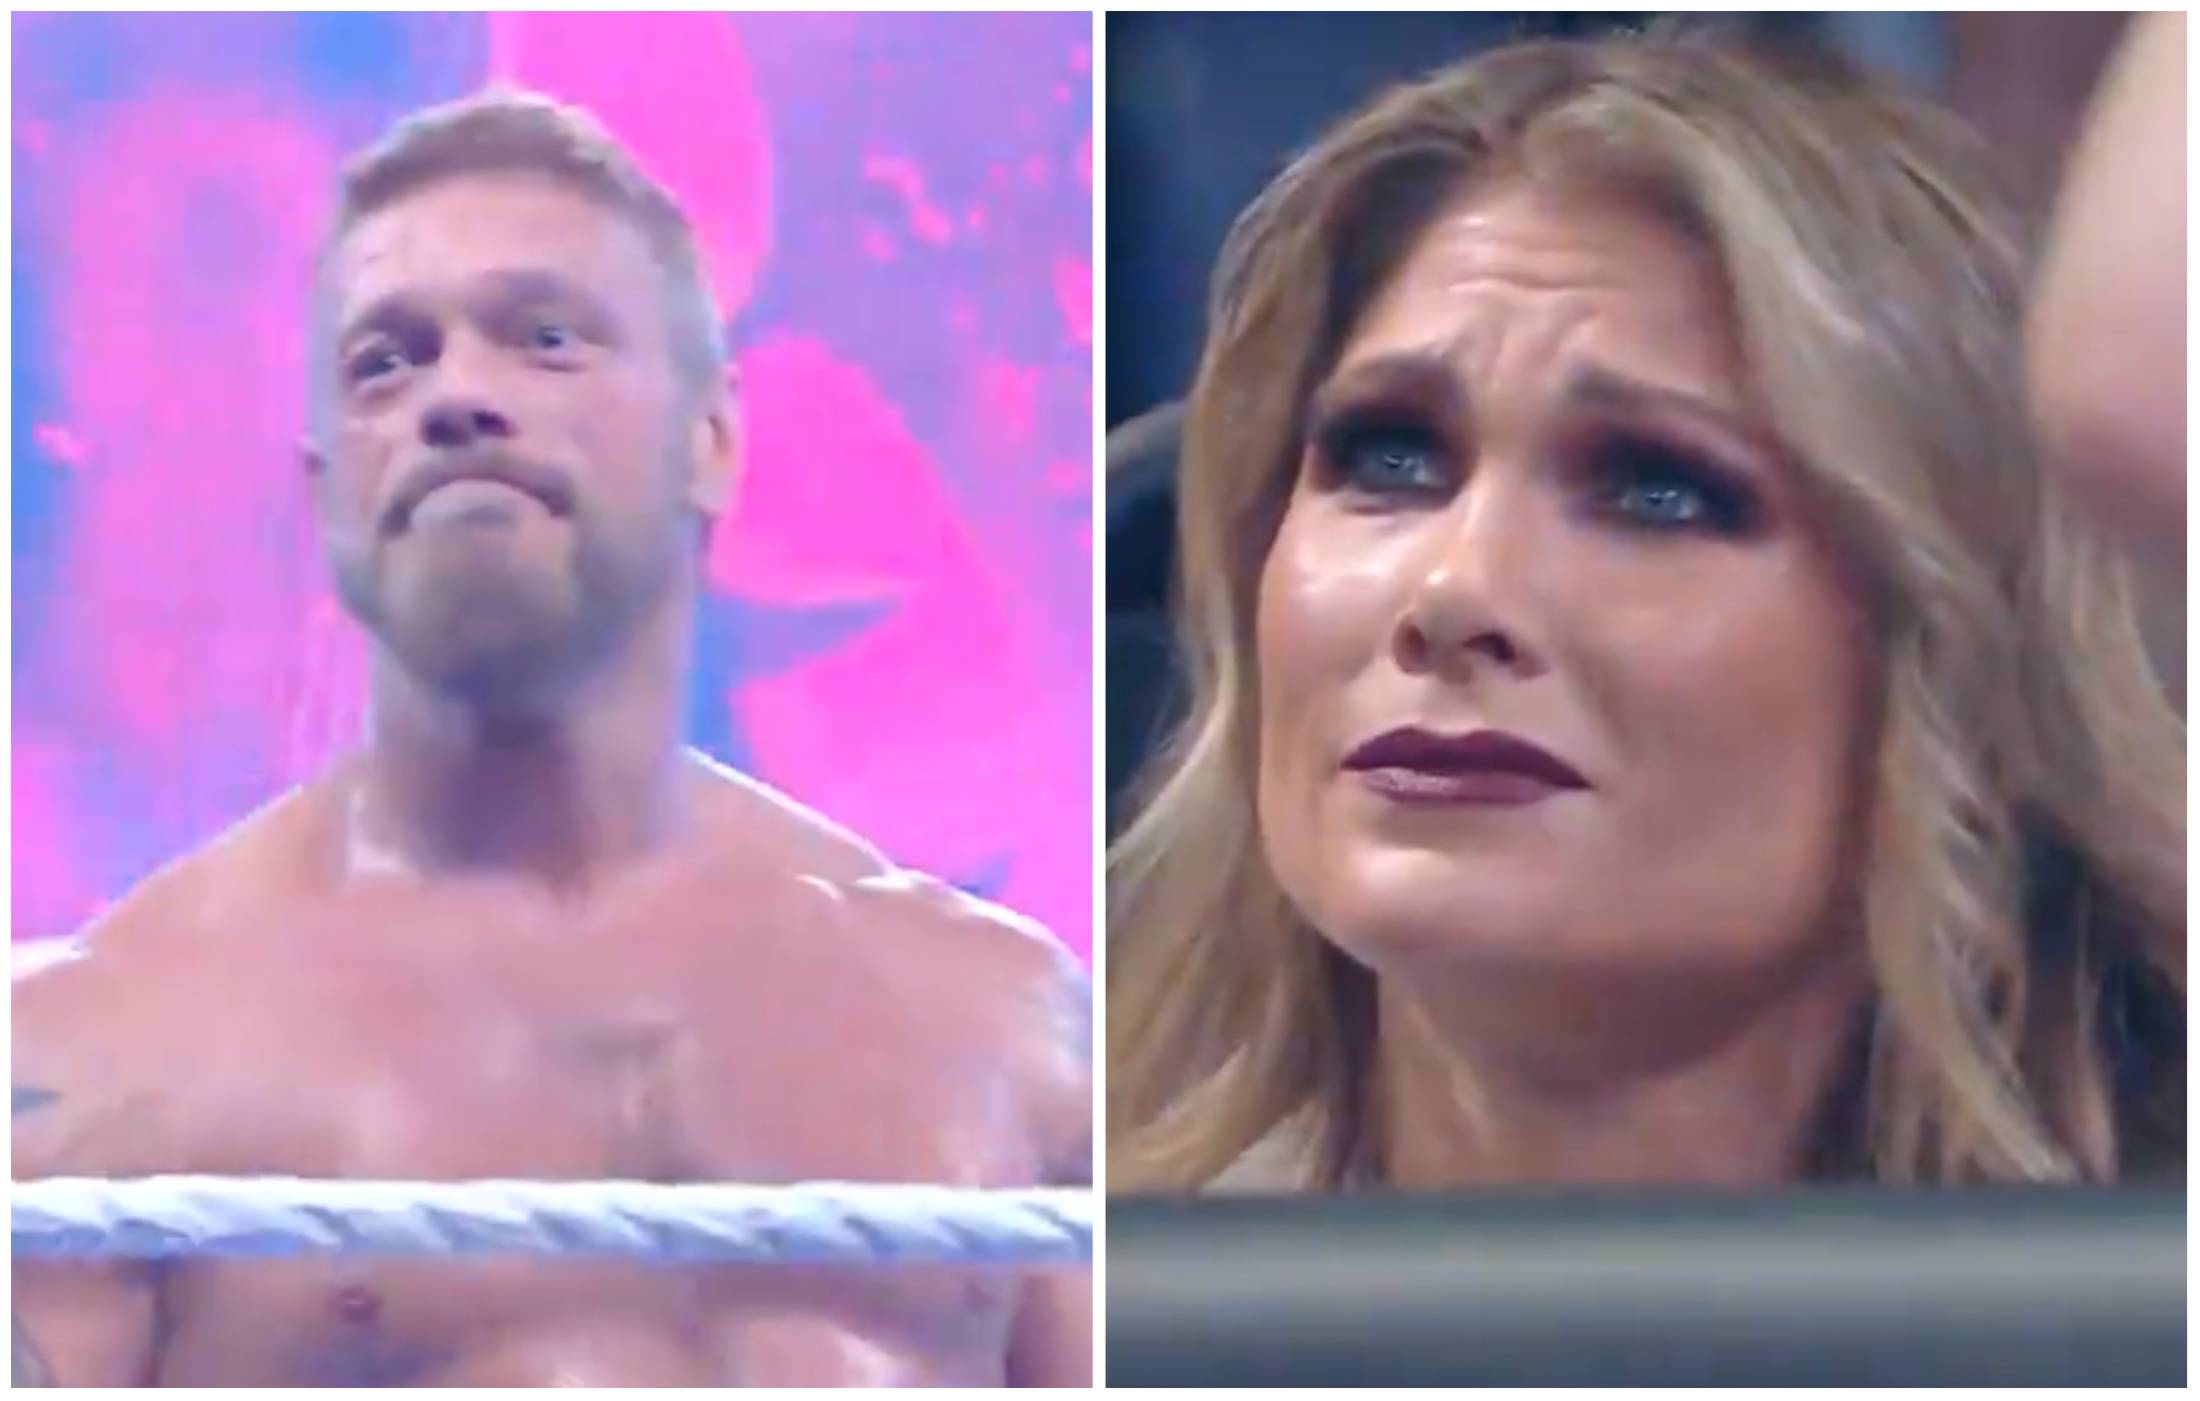 Edge was seriously emotional before his match on WWE Raw